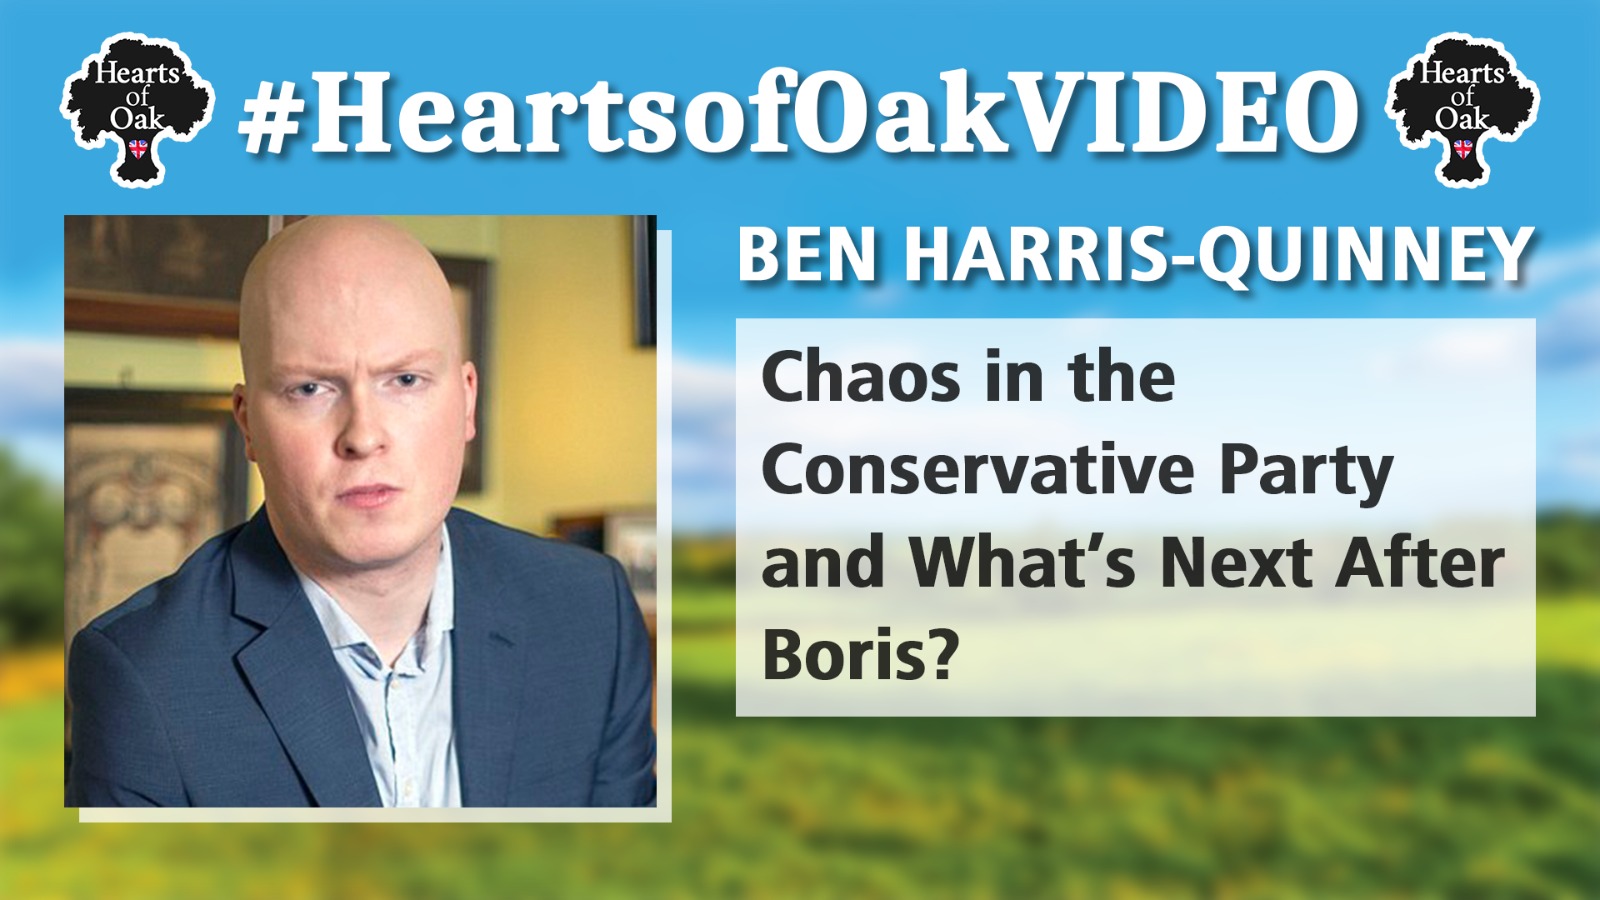 Ben Harris Quinney – Chaos in the Conservative Party and What’s Next After Boris?